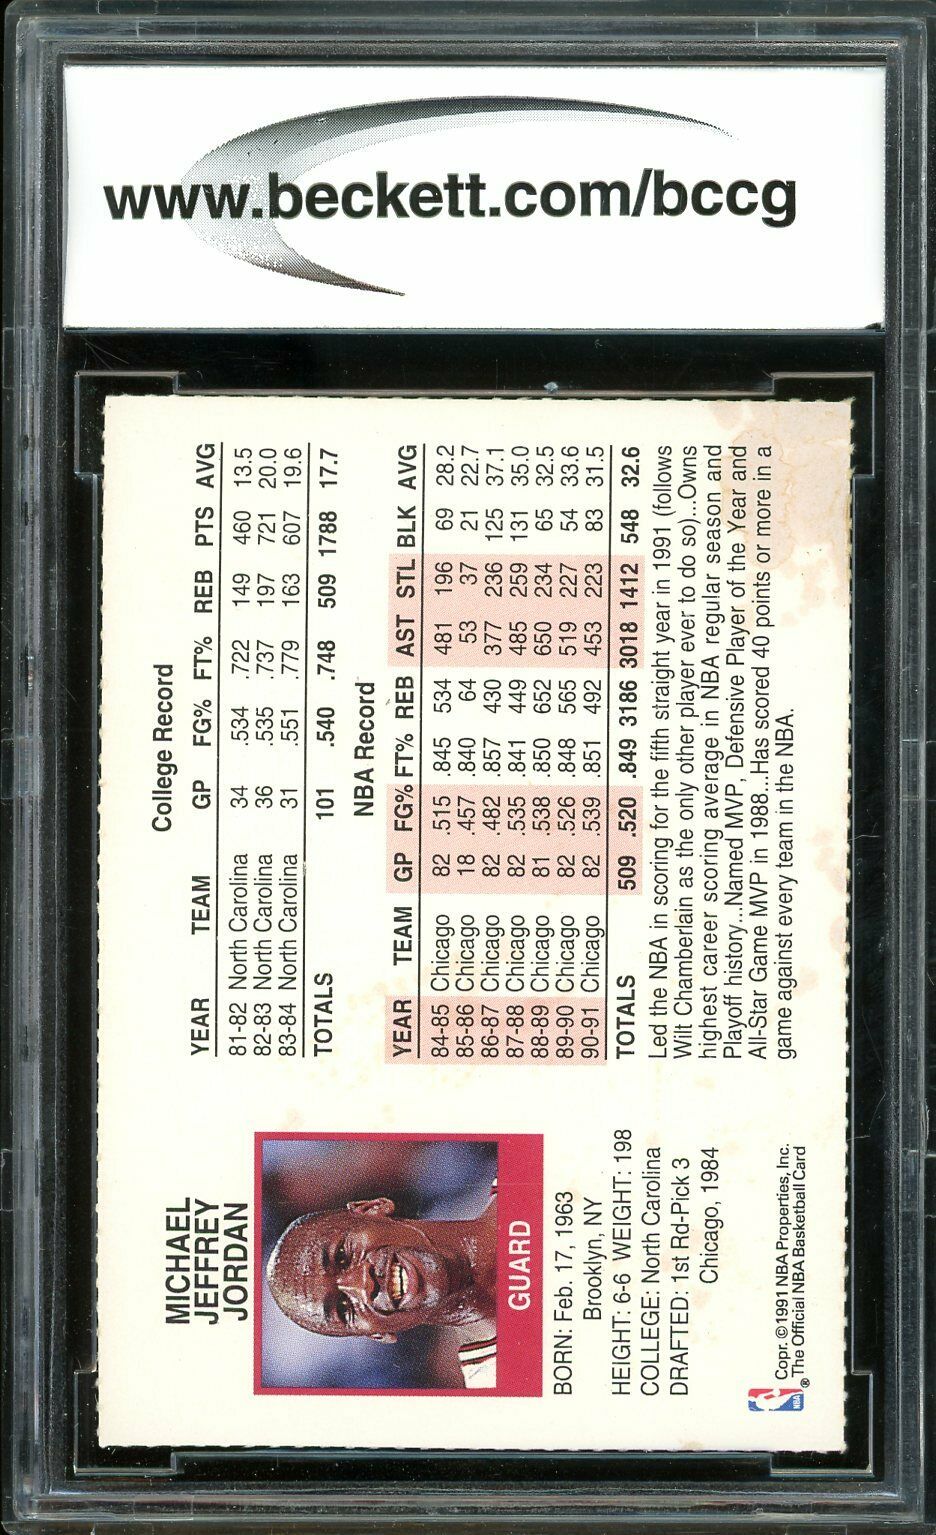 1991-92 Hoops Team Night Sheets #4A Chicago Bulls Card BGS BCCG 8 Excellent+ Image 2